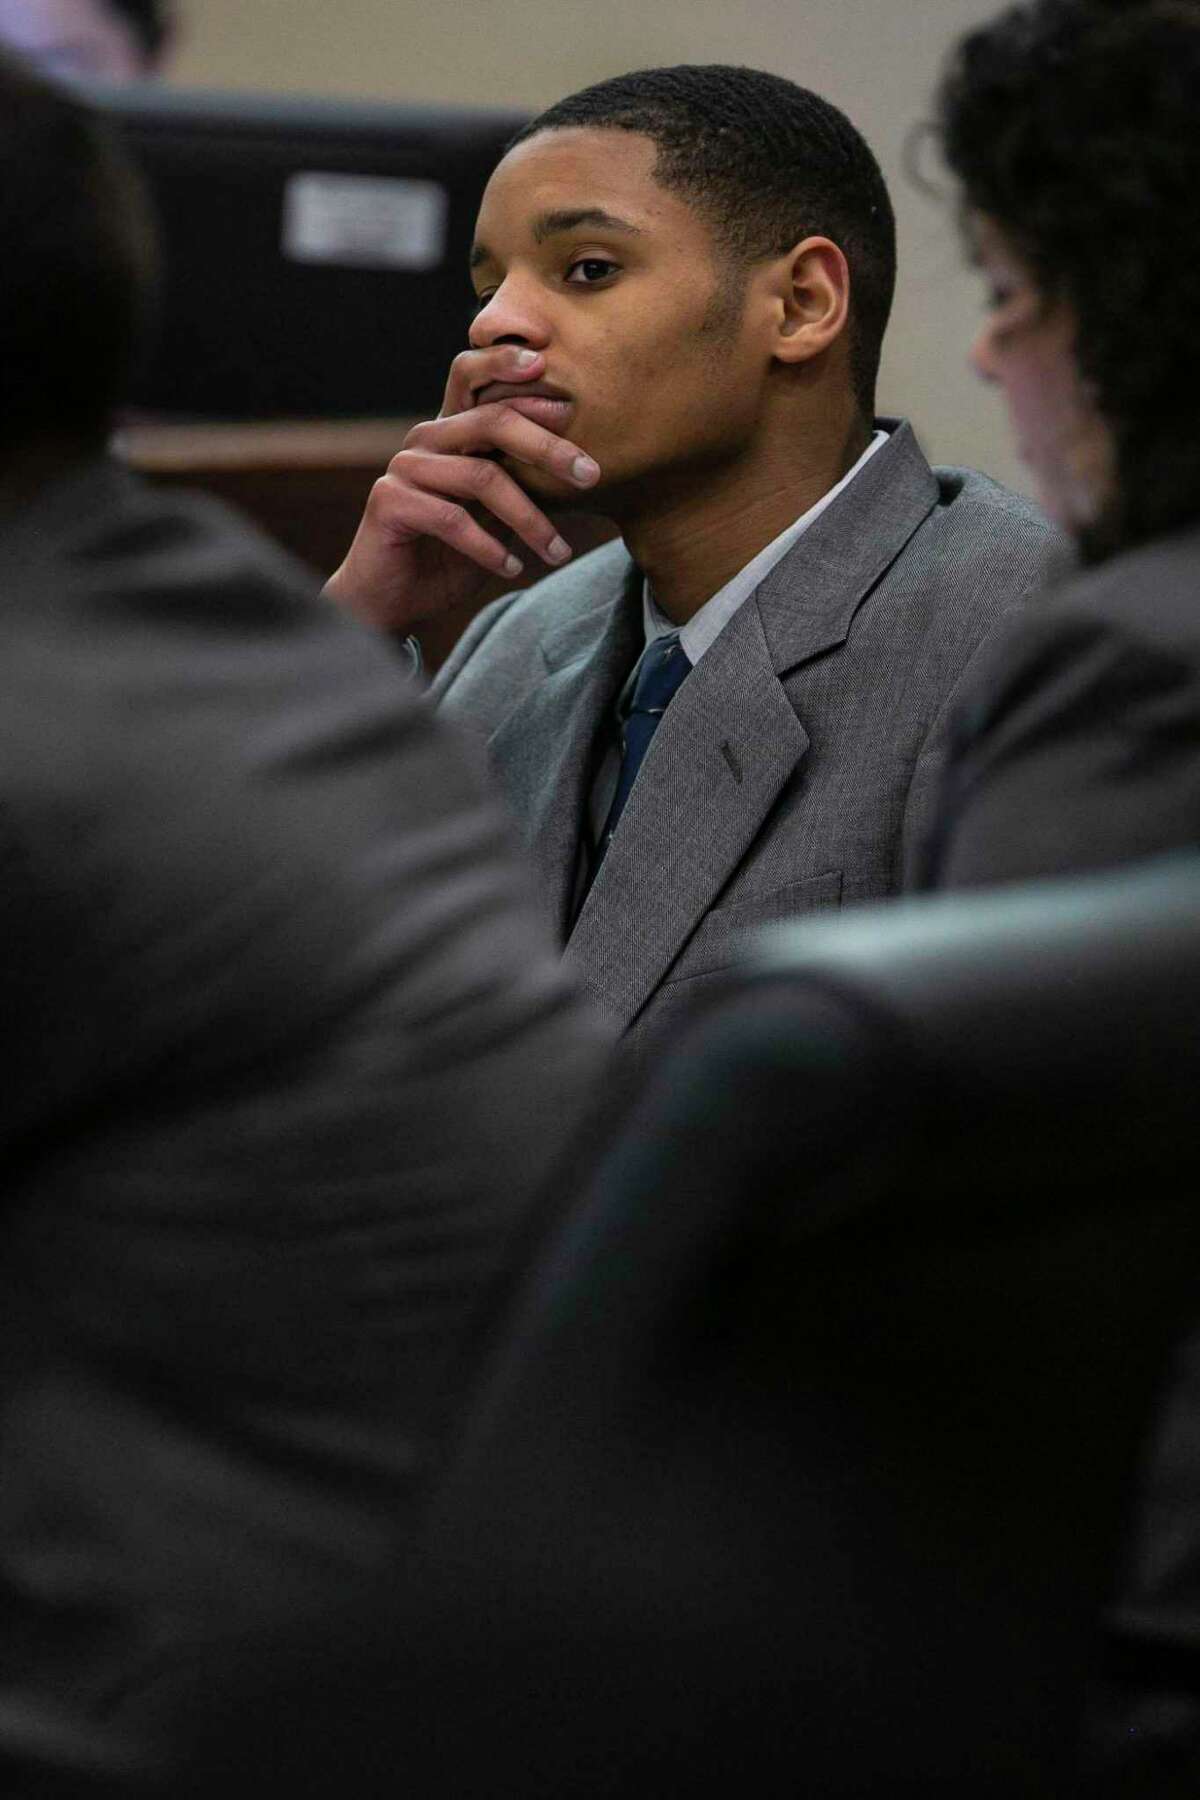 Anton Harris listens to testimony in the 399th State District Court in the Cadena-Reeves Justice Center, Judge Frank J. Castro presiding, during the punishment phase of Anton Harris' trial following a conviction of rape on Feb. 3, 2020.